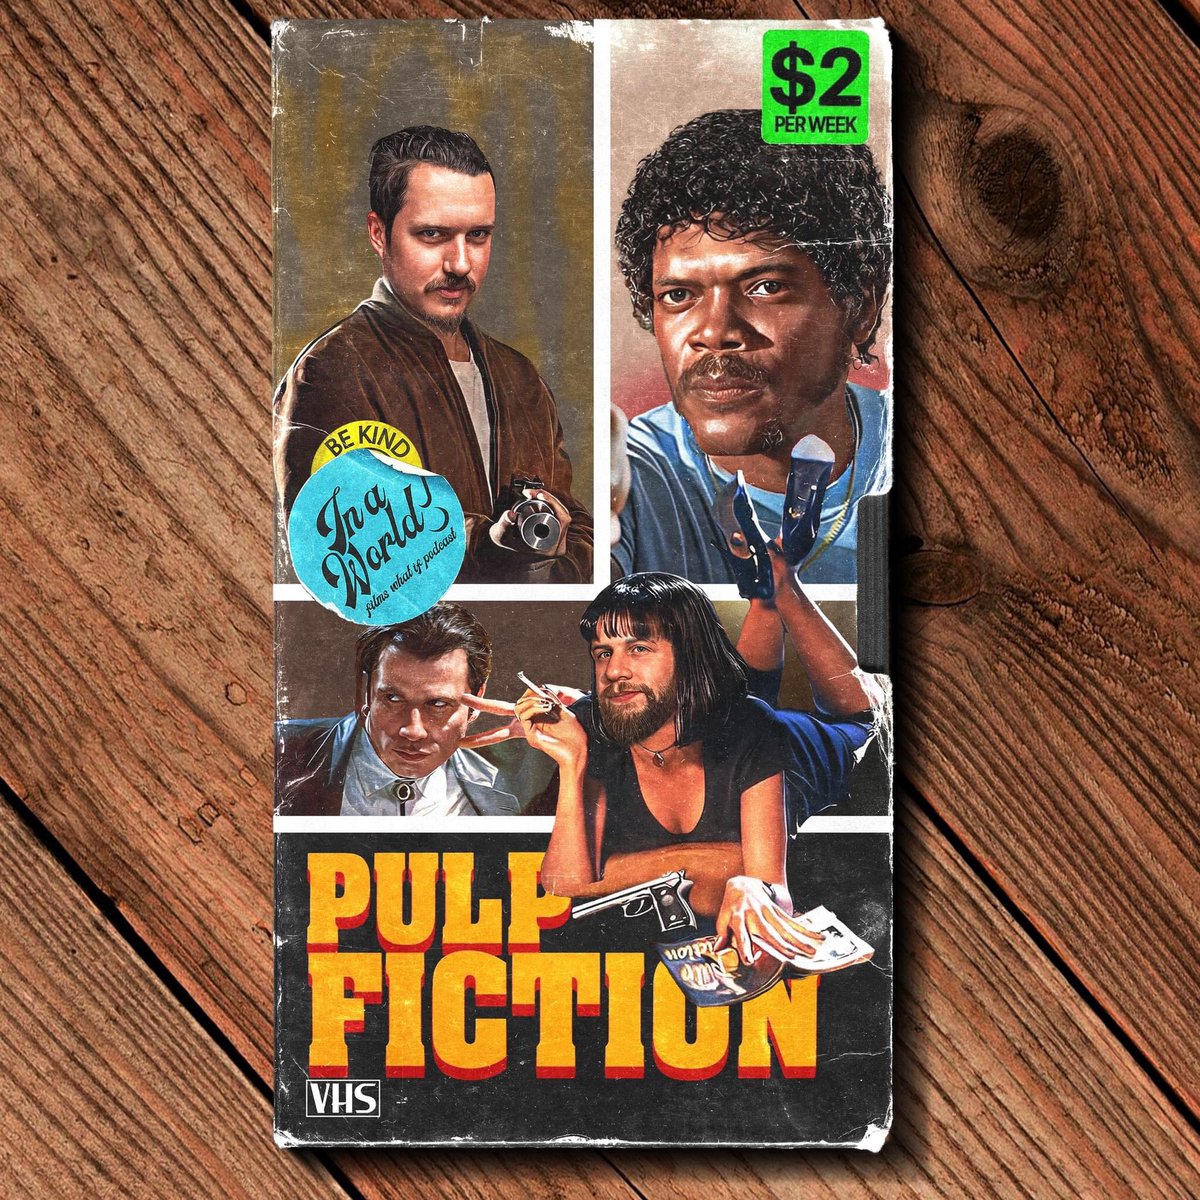 Damn Jimmy! This is some gourmet shit here! Todays #podcast, #pulpfiction! LINK IN BIO.  #inaworld #filmtwitter #podcaster #moviepodcast #film #filmpodcast #tarantino  #umathurman #vhs #vhsedit #multiverse #whatifs #movies #film #samuelljackson #brucewillis #independentpodcaster